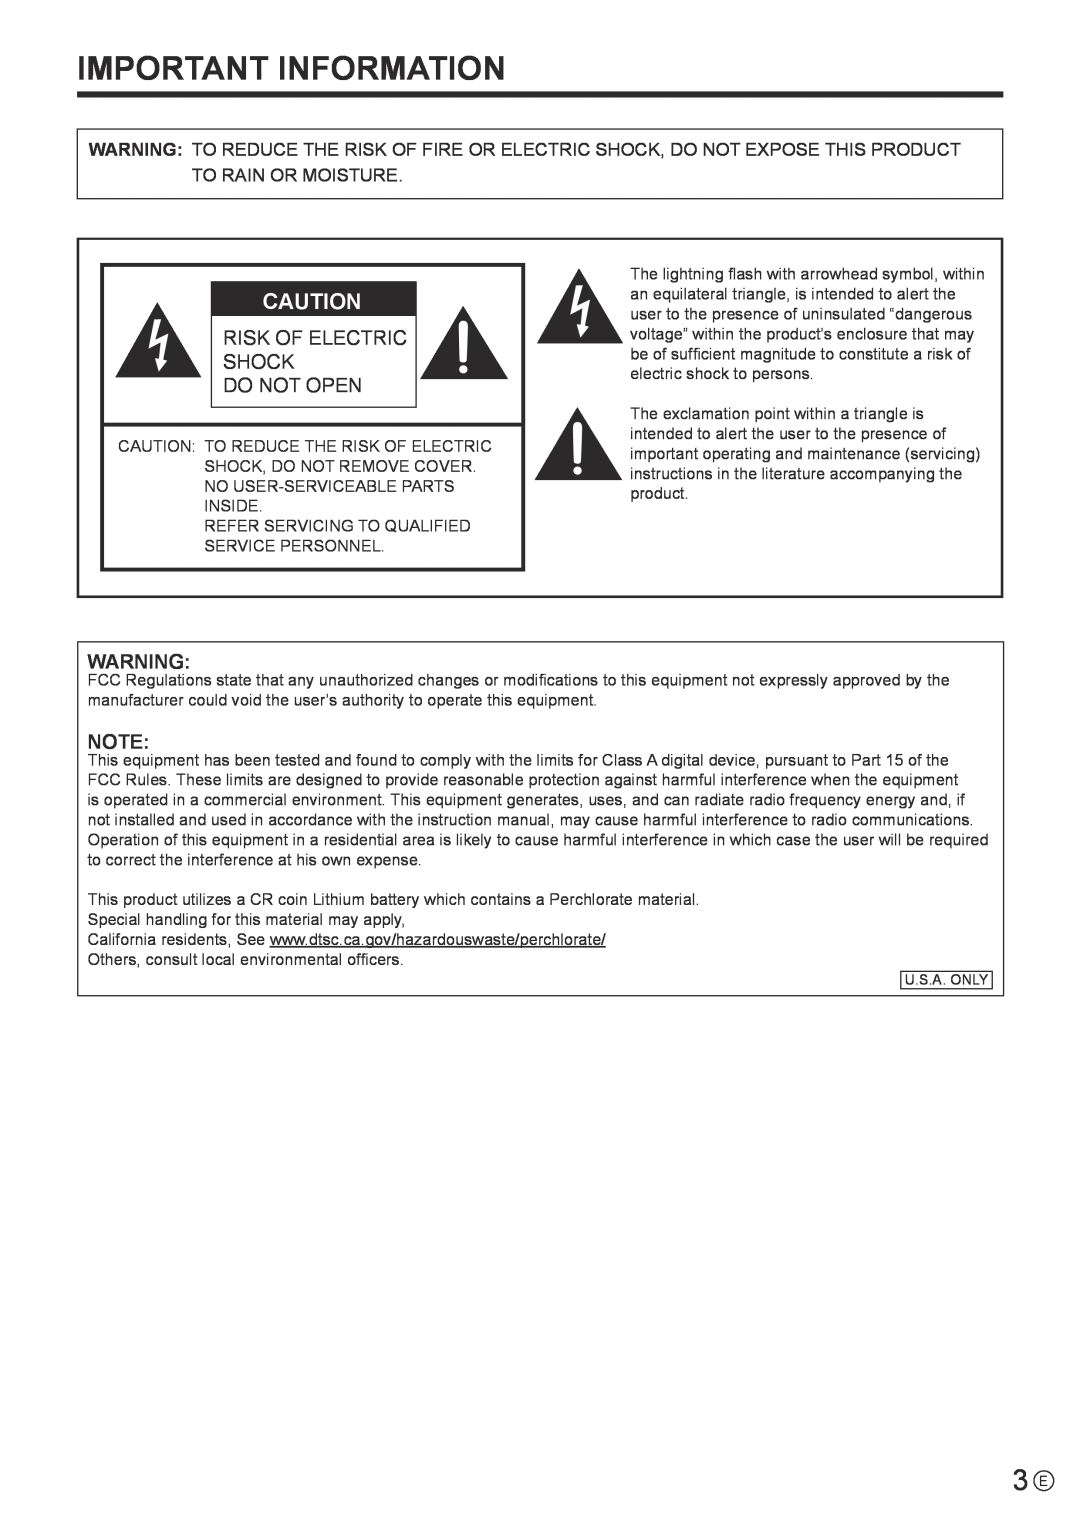 Sharp PN-E602 operation manual Important Information, Risk Of Electric Shock Do Not Open 